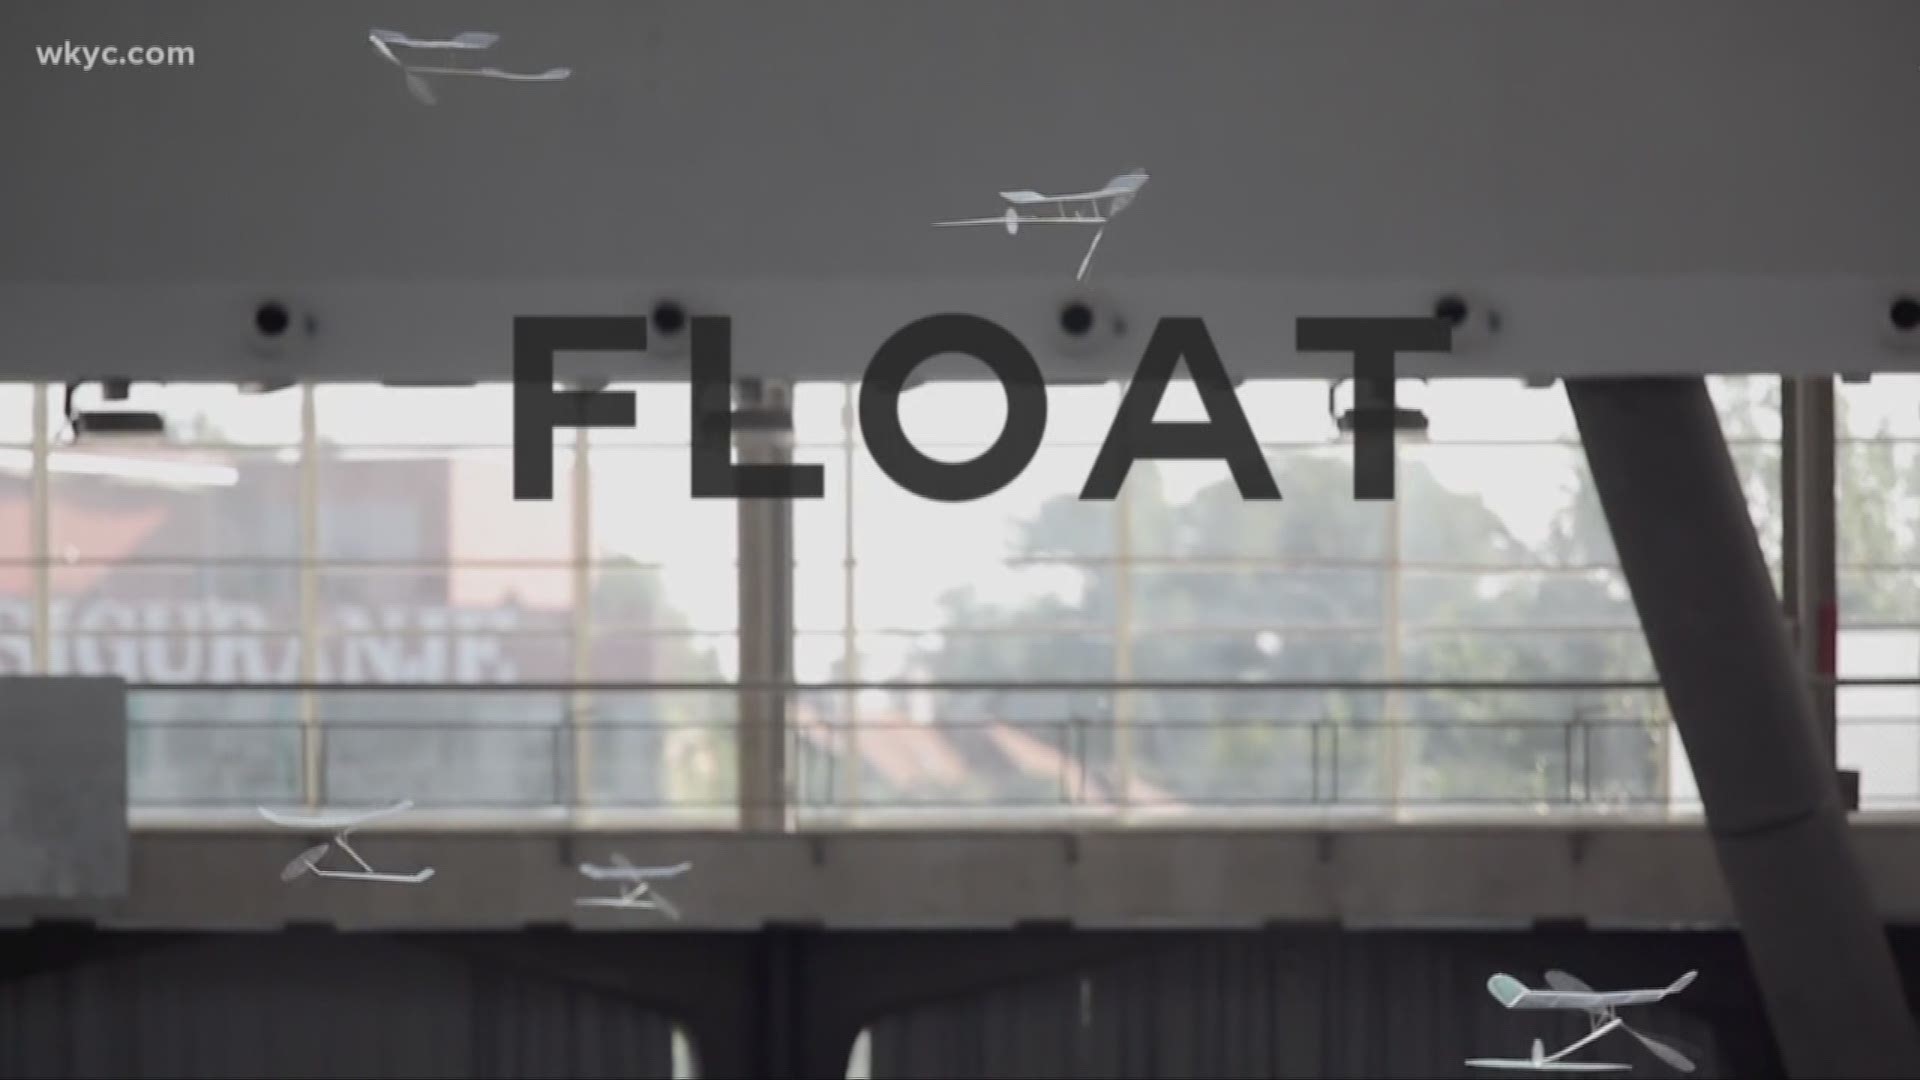 April 4, 2019: It's been a long road for Shaker Heights natives, Phil Kibbe and Ben Saks. Friday night, their documentary, 'Float,' makes its world premiere at the Cleveland International Film Festival.